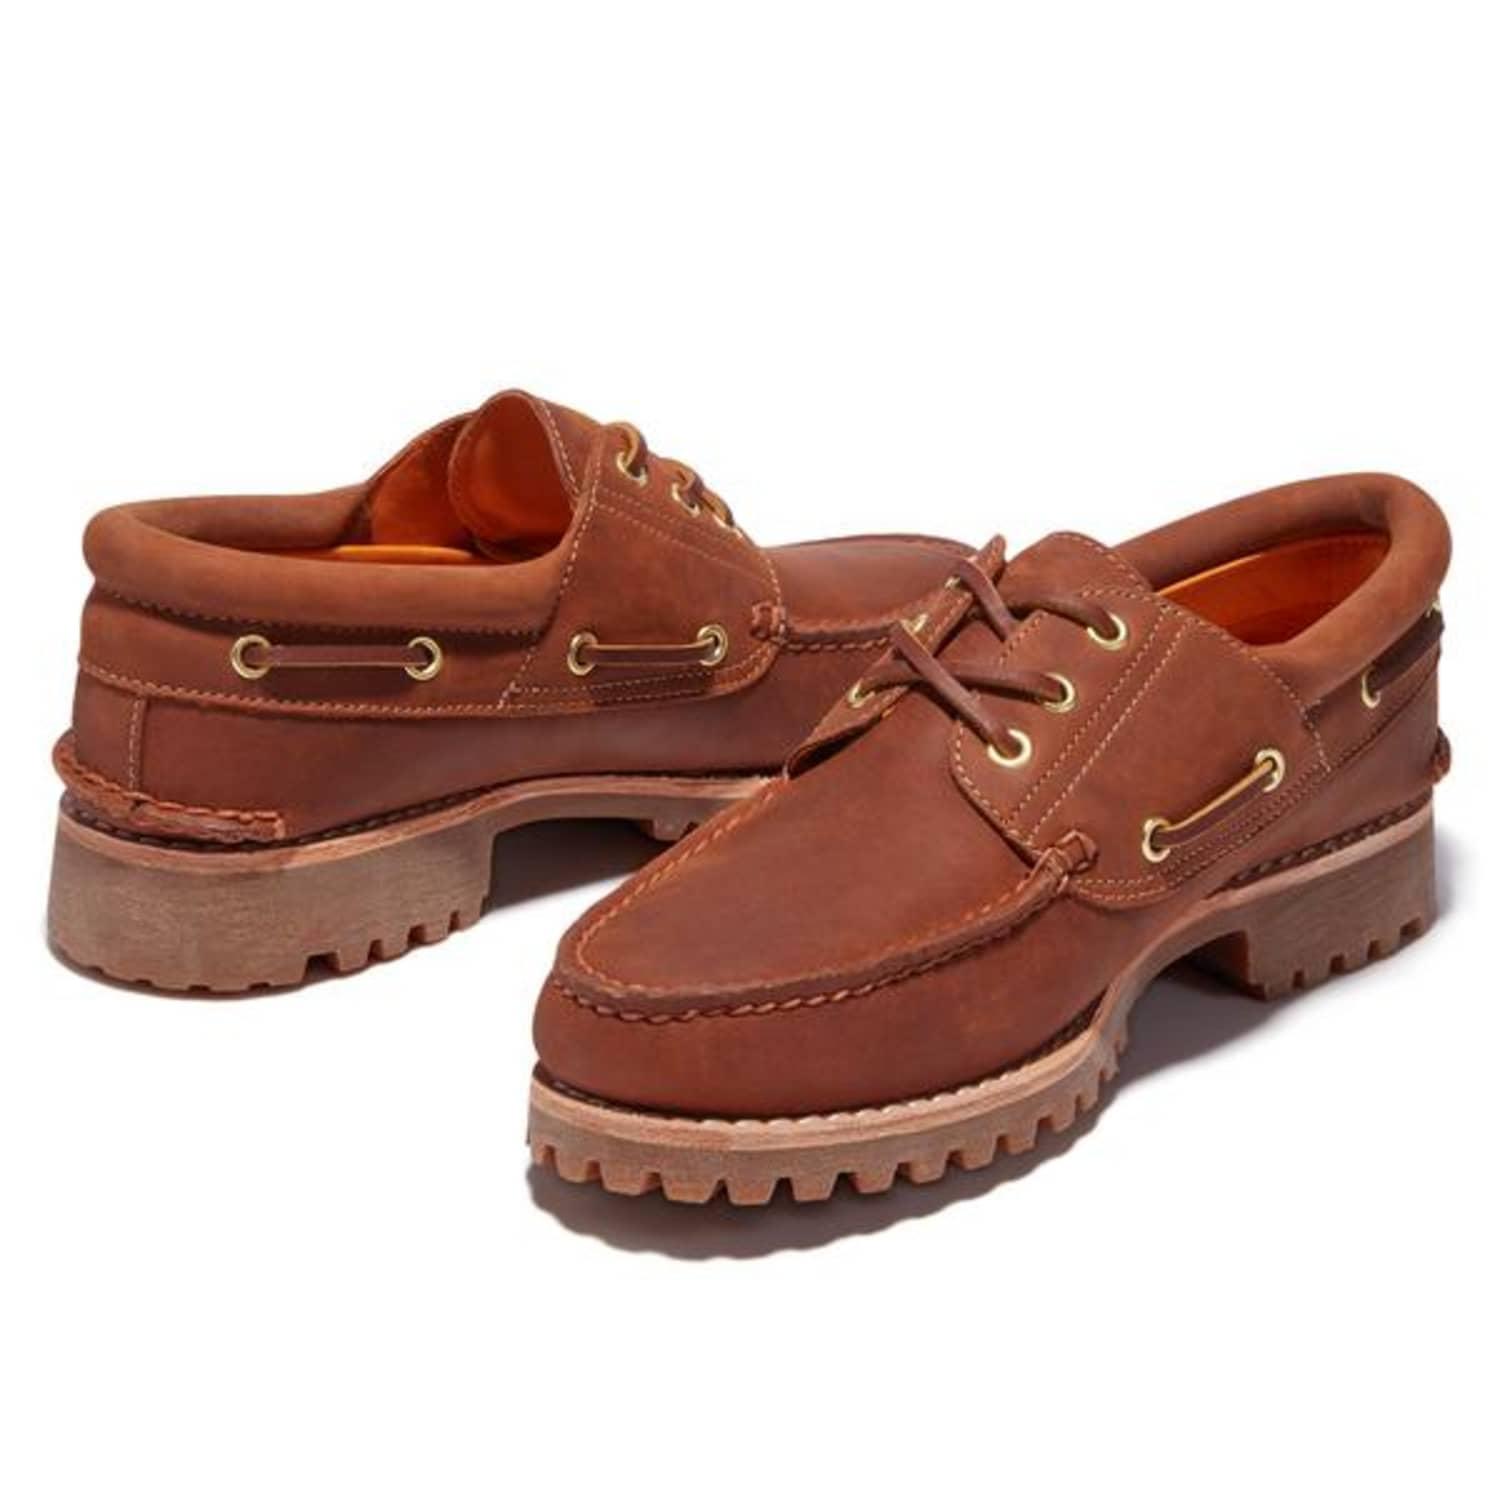 Timberland Authentics 3 Eye Classic Lug Rust Full Grain Shoes in ...